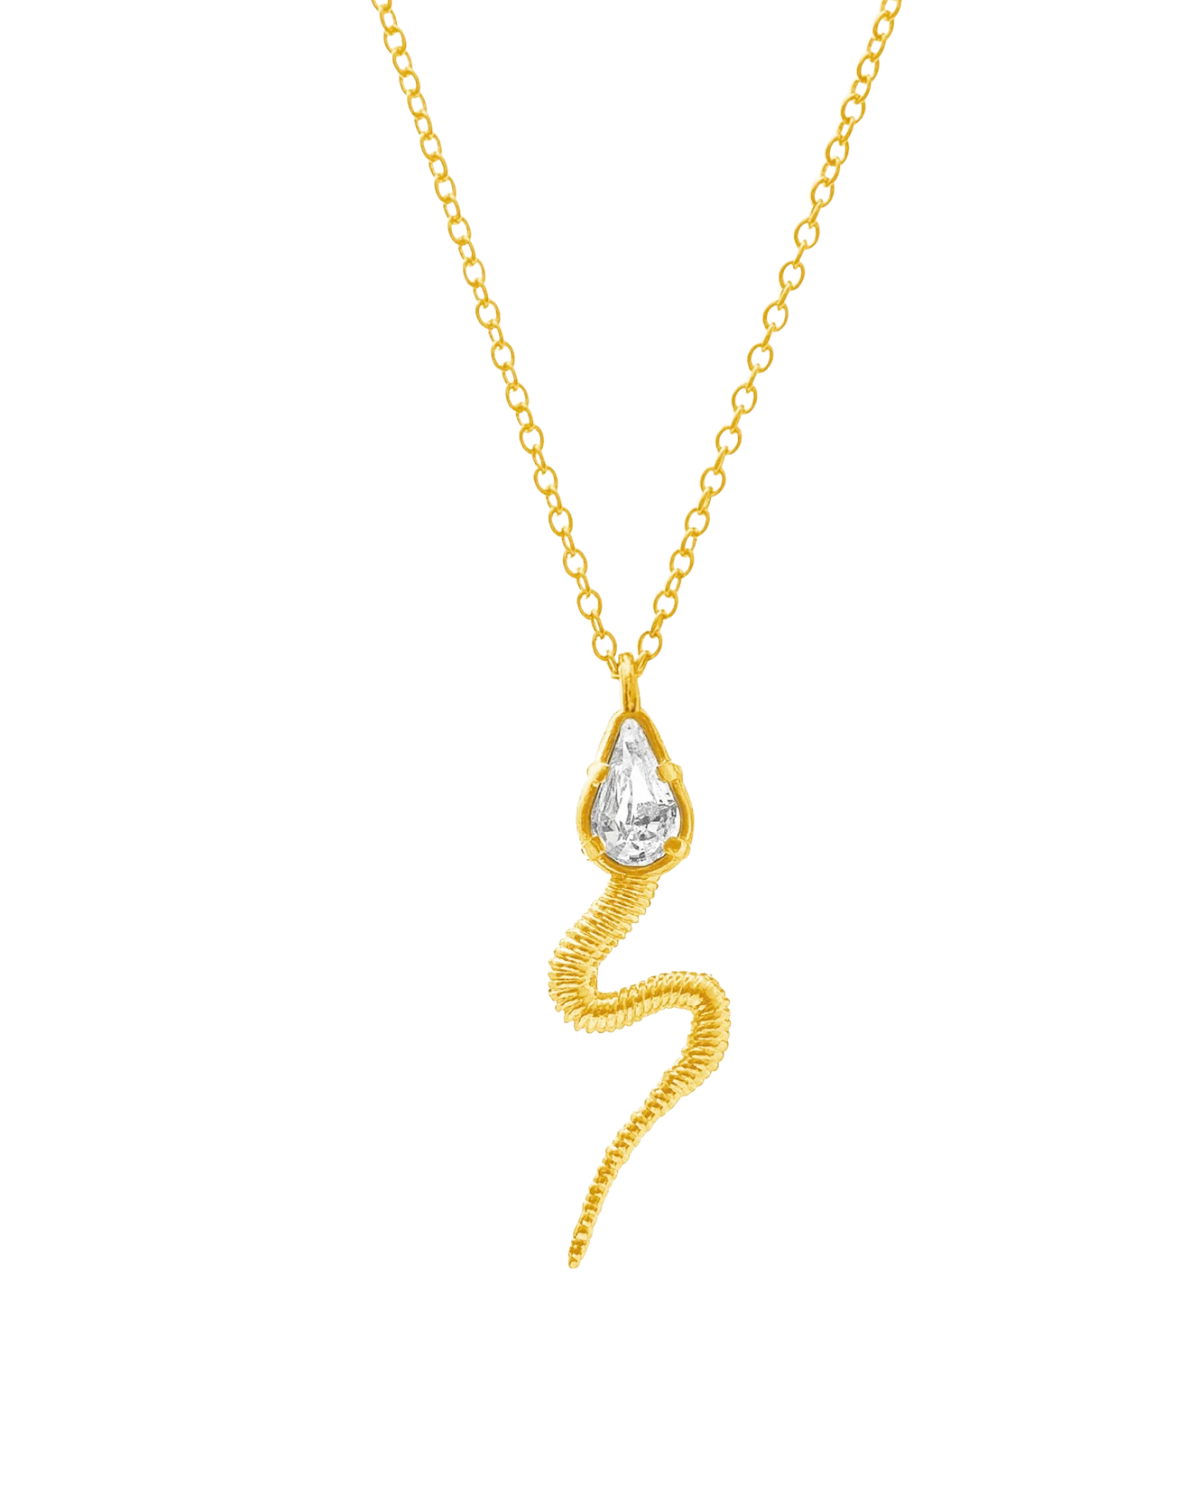 Snaky Necklace (Gold/Crystal)